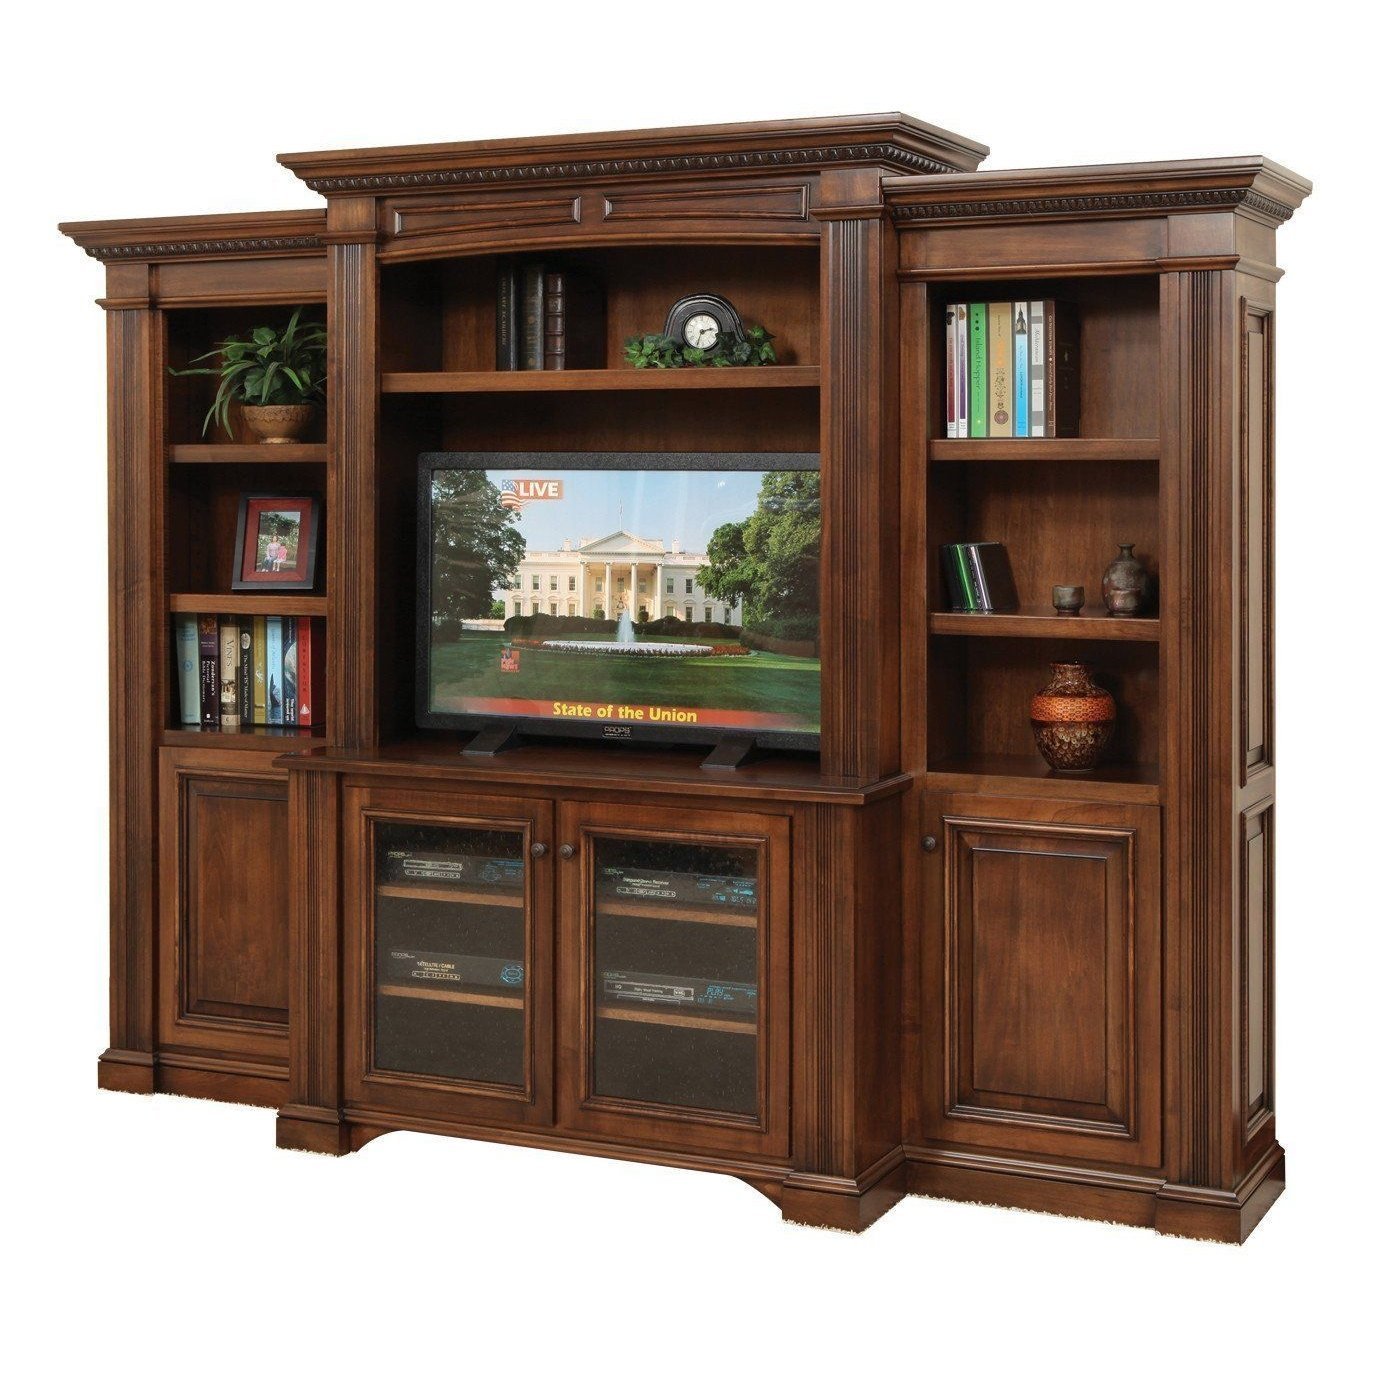 Lincoln 48" Media Center with Bookcases